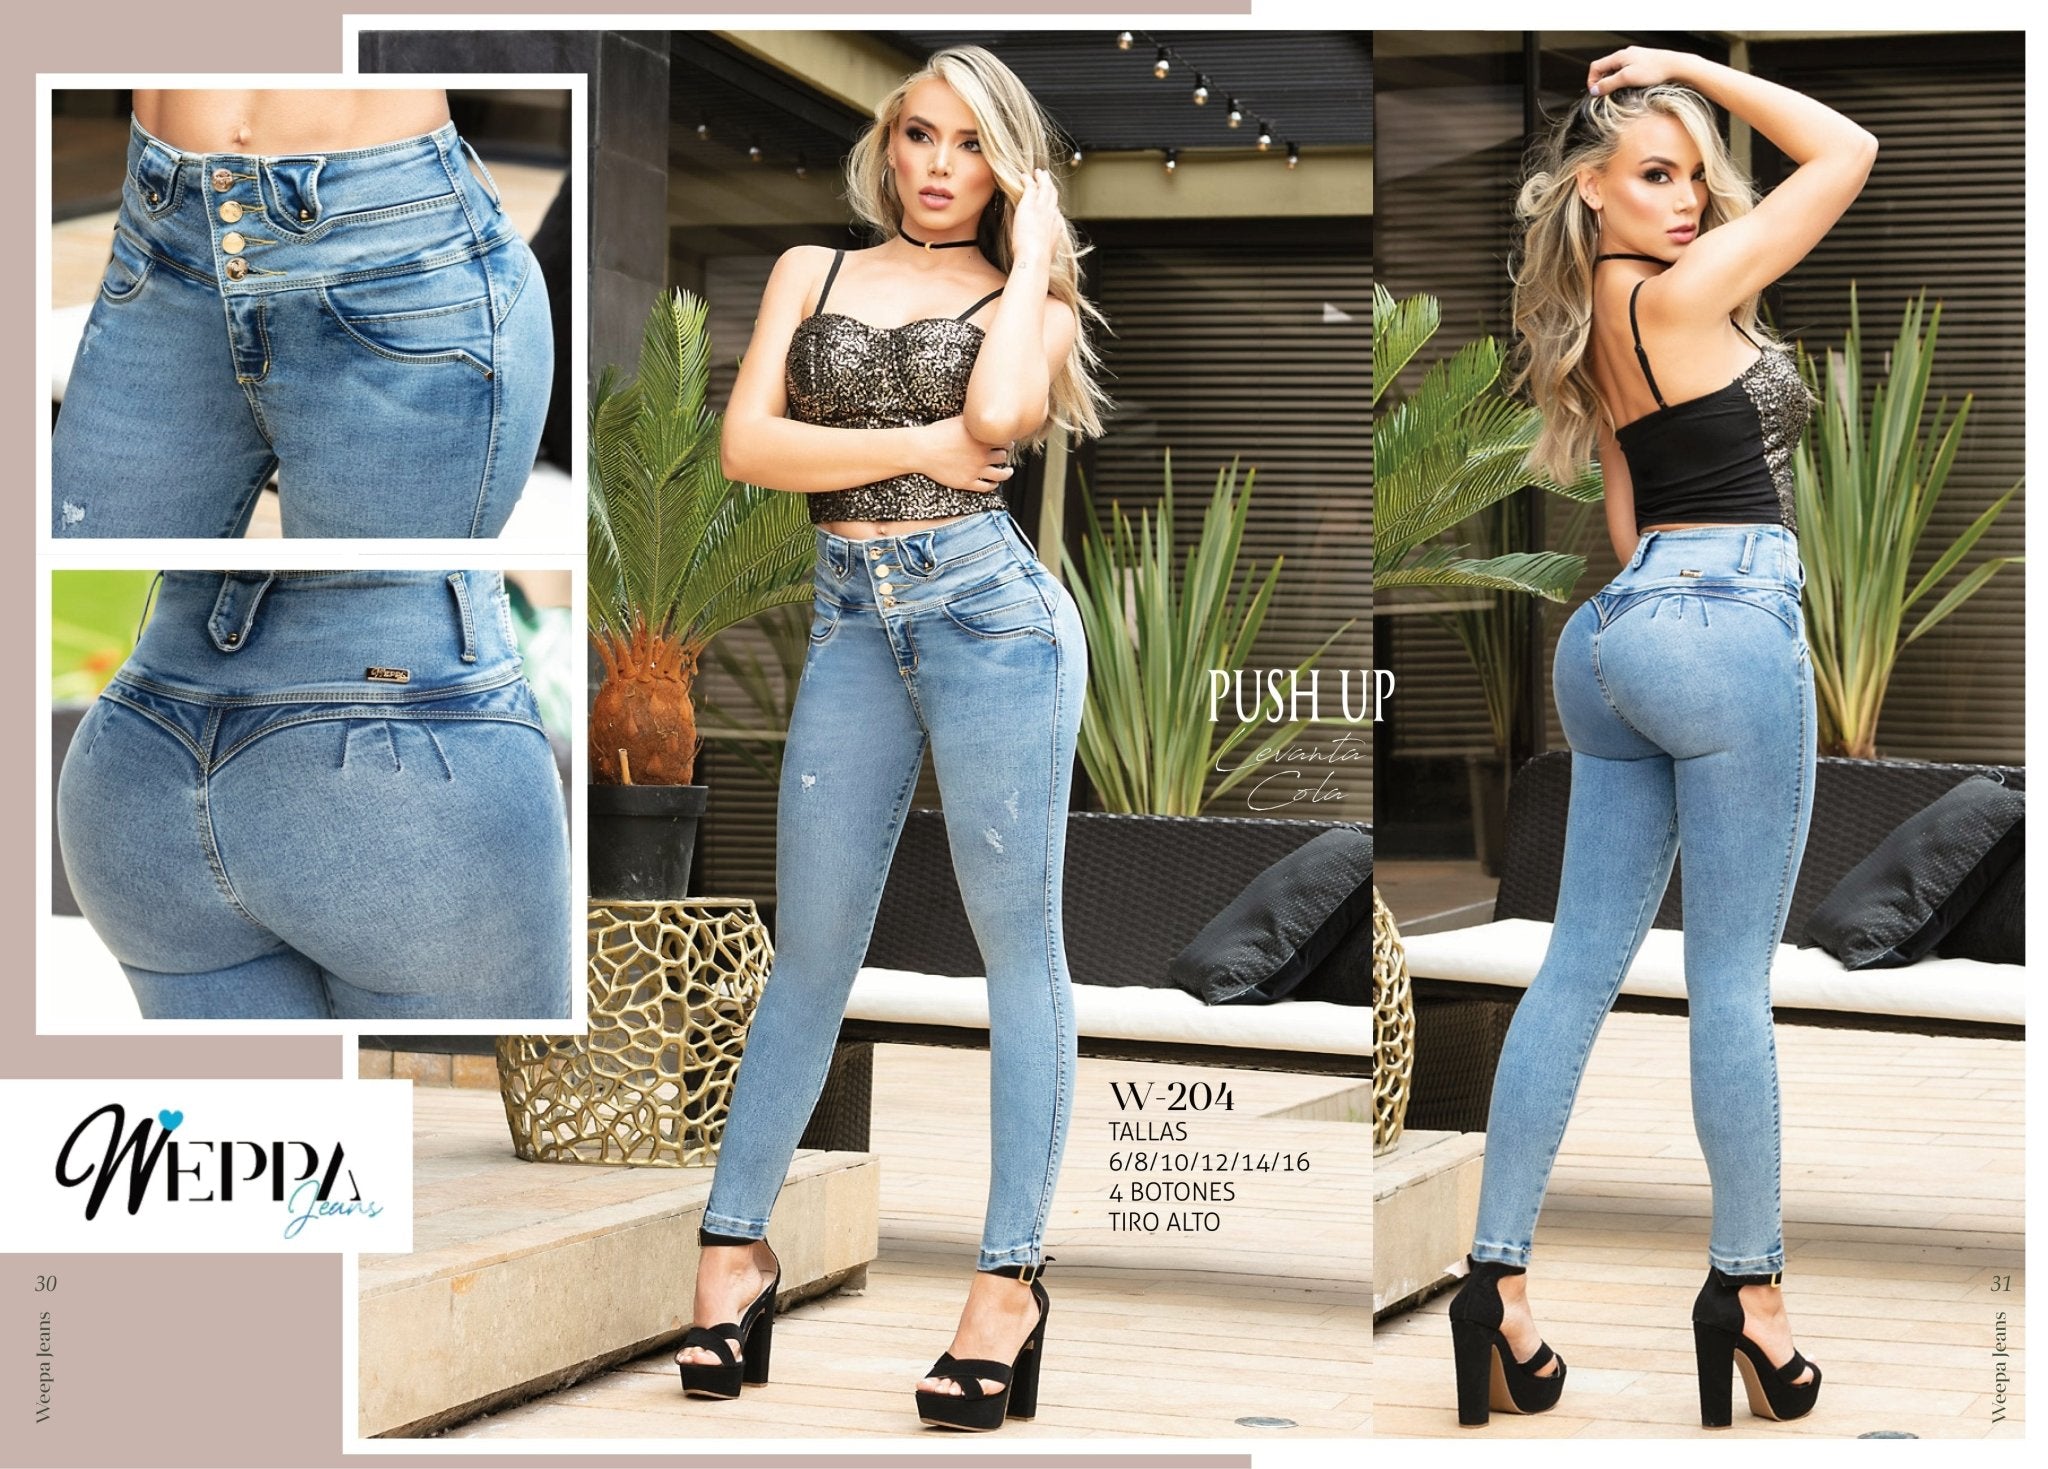 W-204 100% Authentic Colombian Push Up Jeans